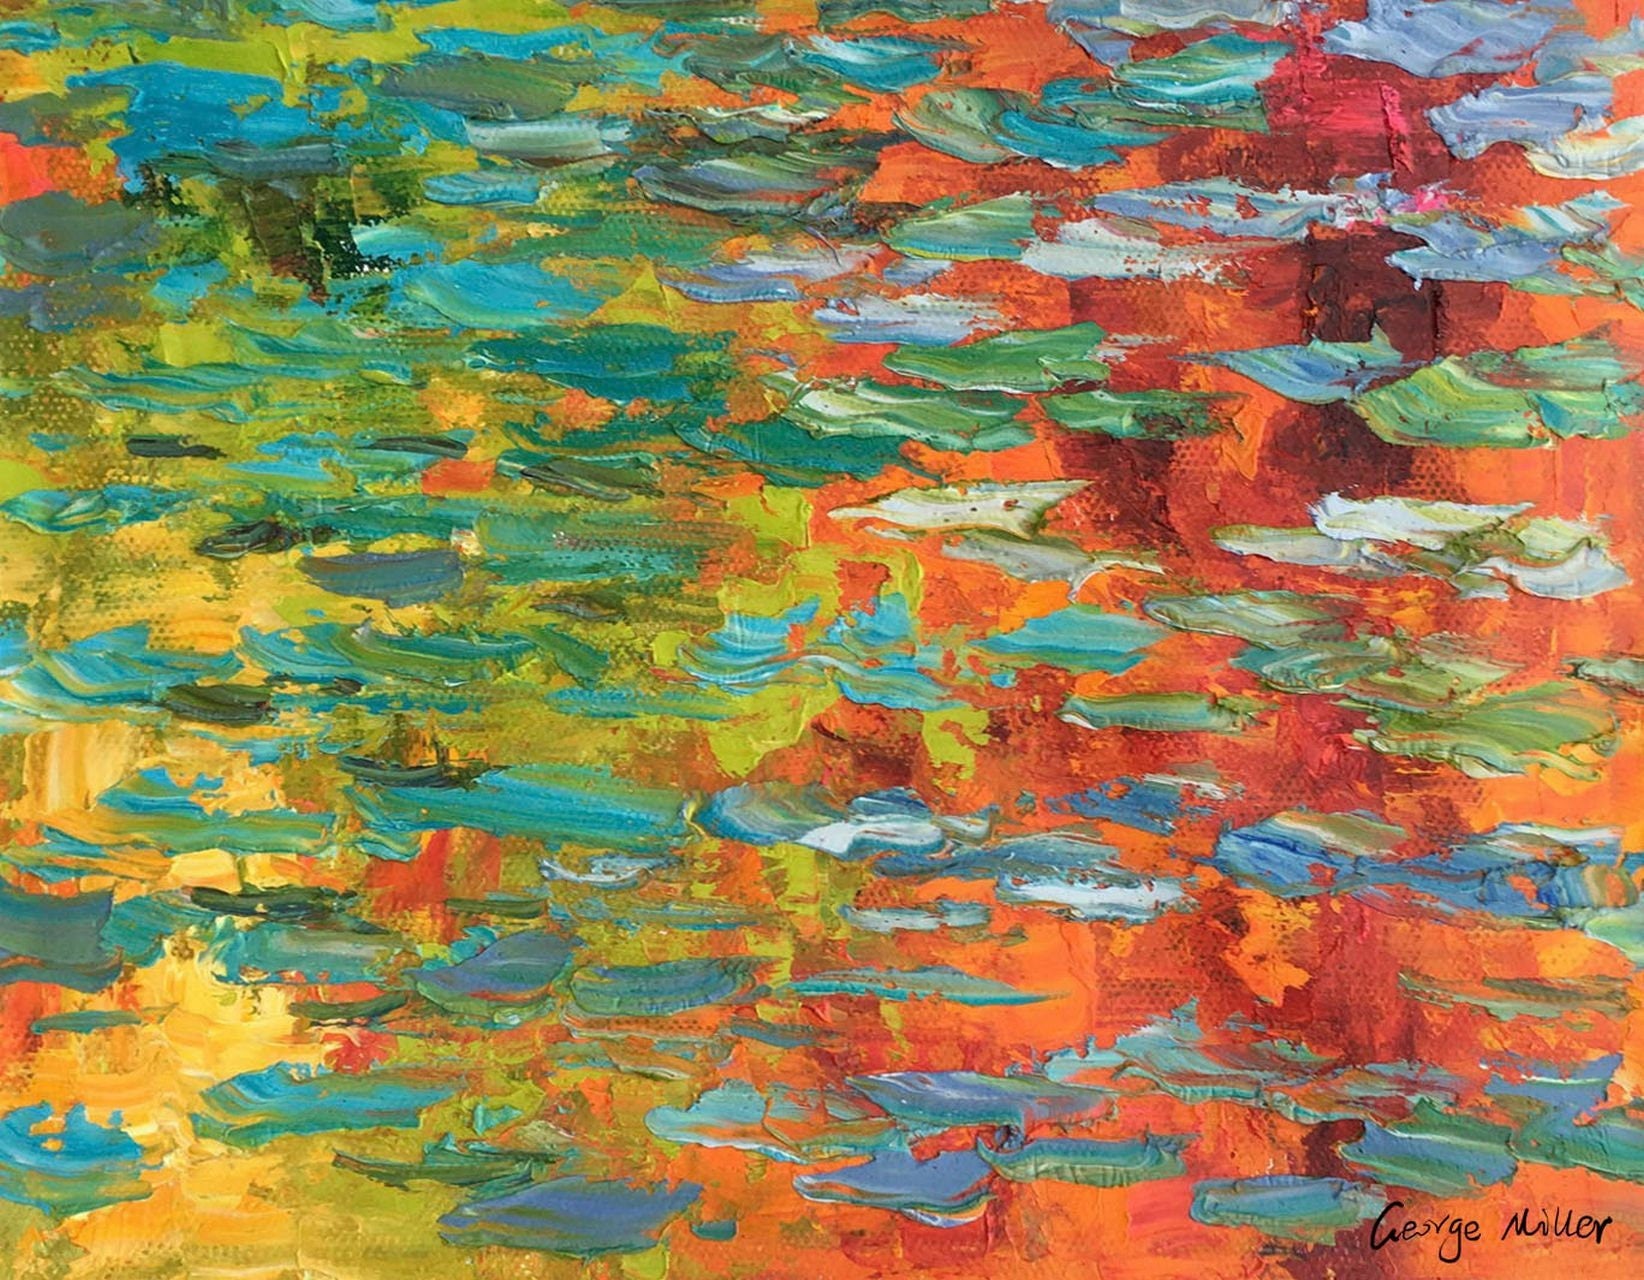 Abstract Canvas Painting, Landscape Painting, Waterlilies, Abstract Oil Painting, Oil Painting Original, Spring Landscape Painting